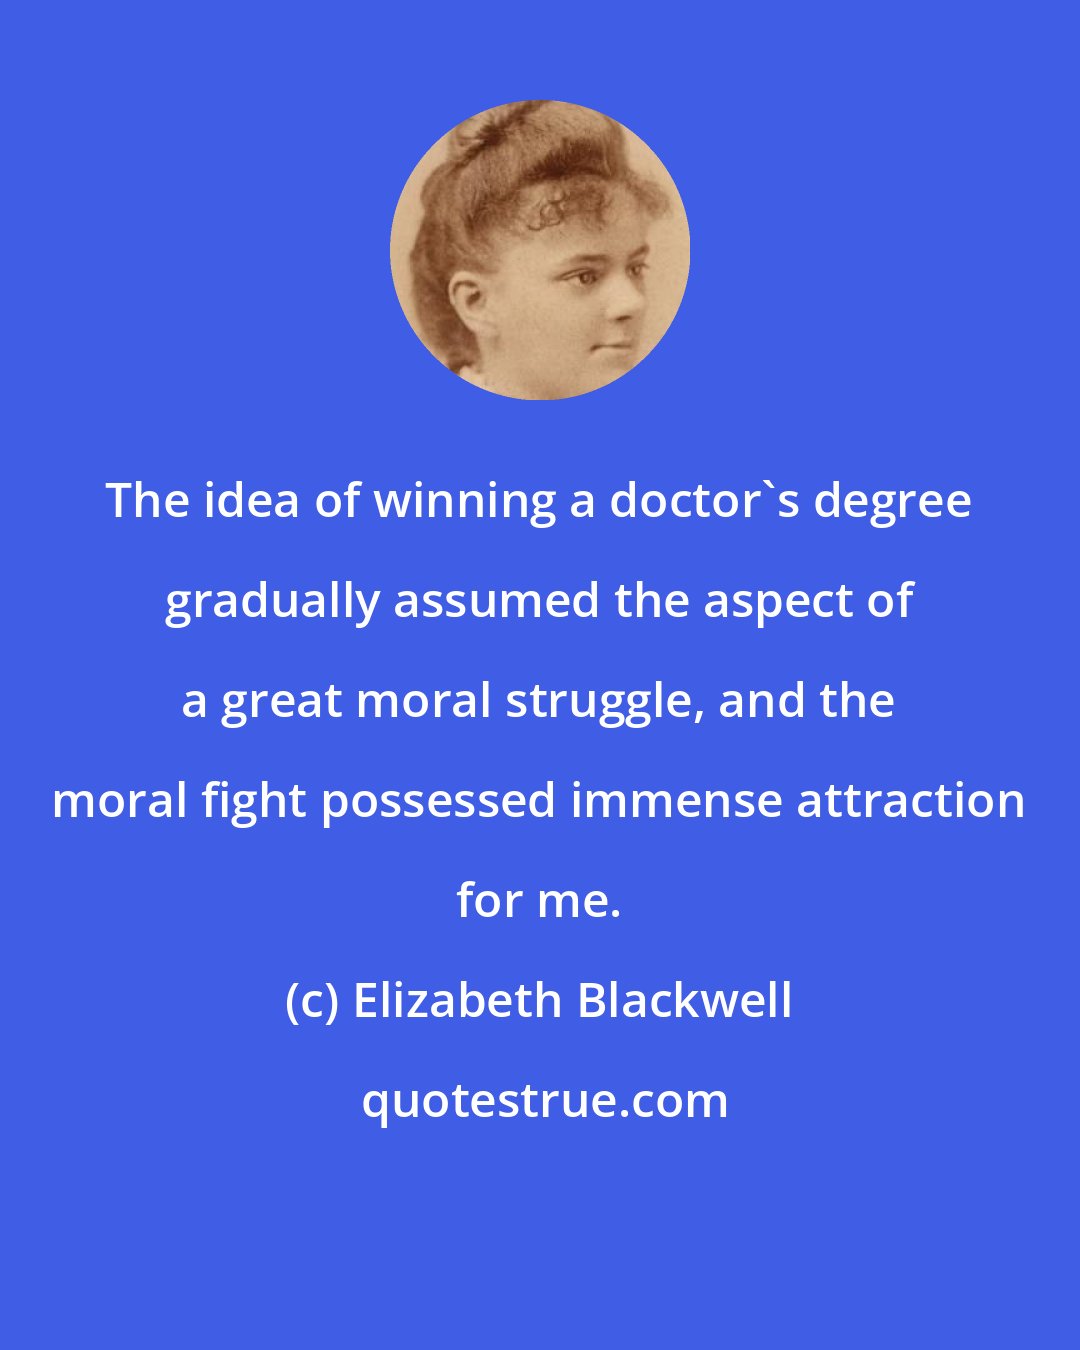 Elizabeth Blackwell: The idea of winning a doctor's degree gradually assumed the aspect of a great moral struggle, and the moral fight possessed immense attraction for me.